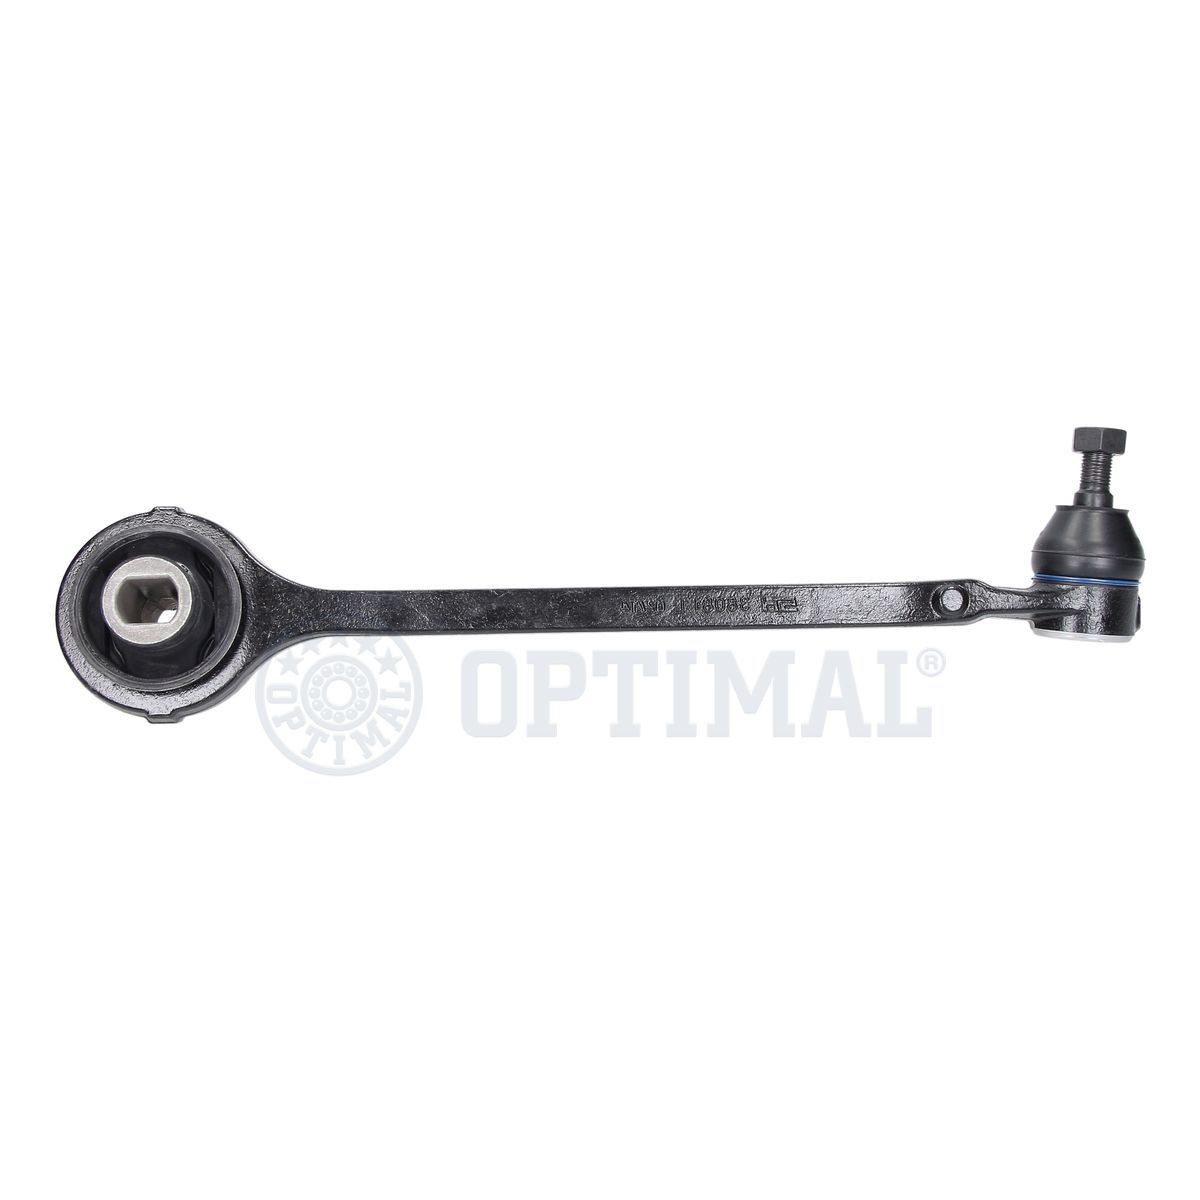 OPTIMAL with ball joint, with rubber mount, Right, Lower, Front, Front Axle, Control Arm, Cast Steel, Cone Size: 16,6 mm Cone Size: 16,6mm Control arm G5-884 buy